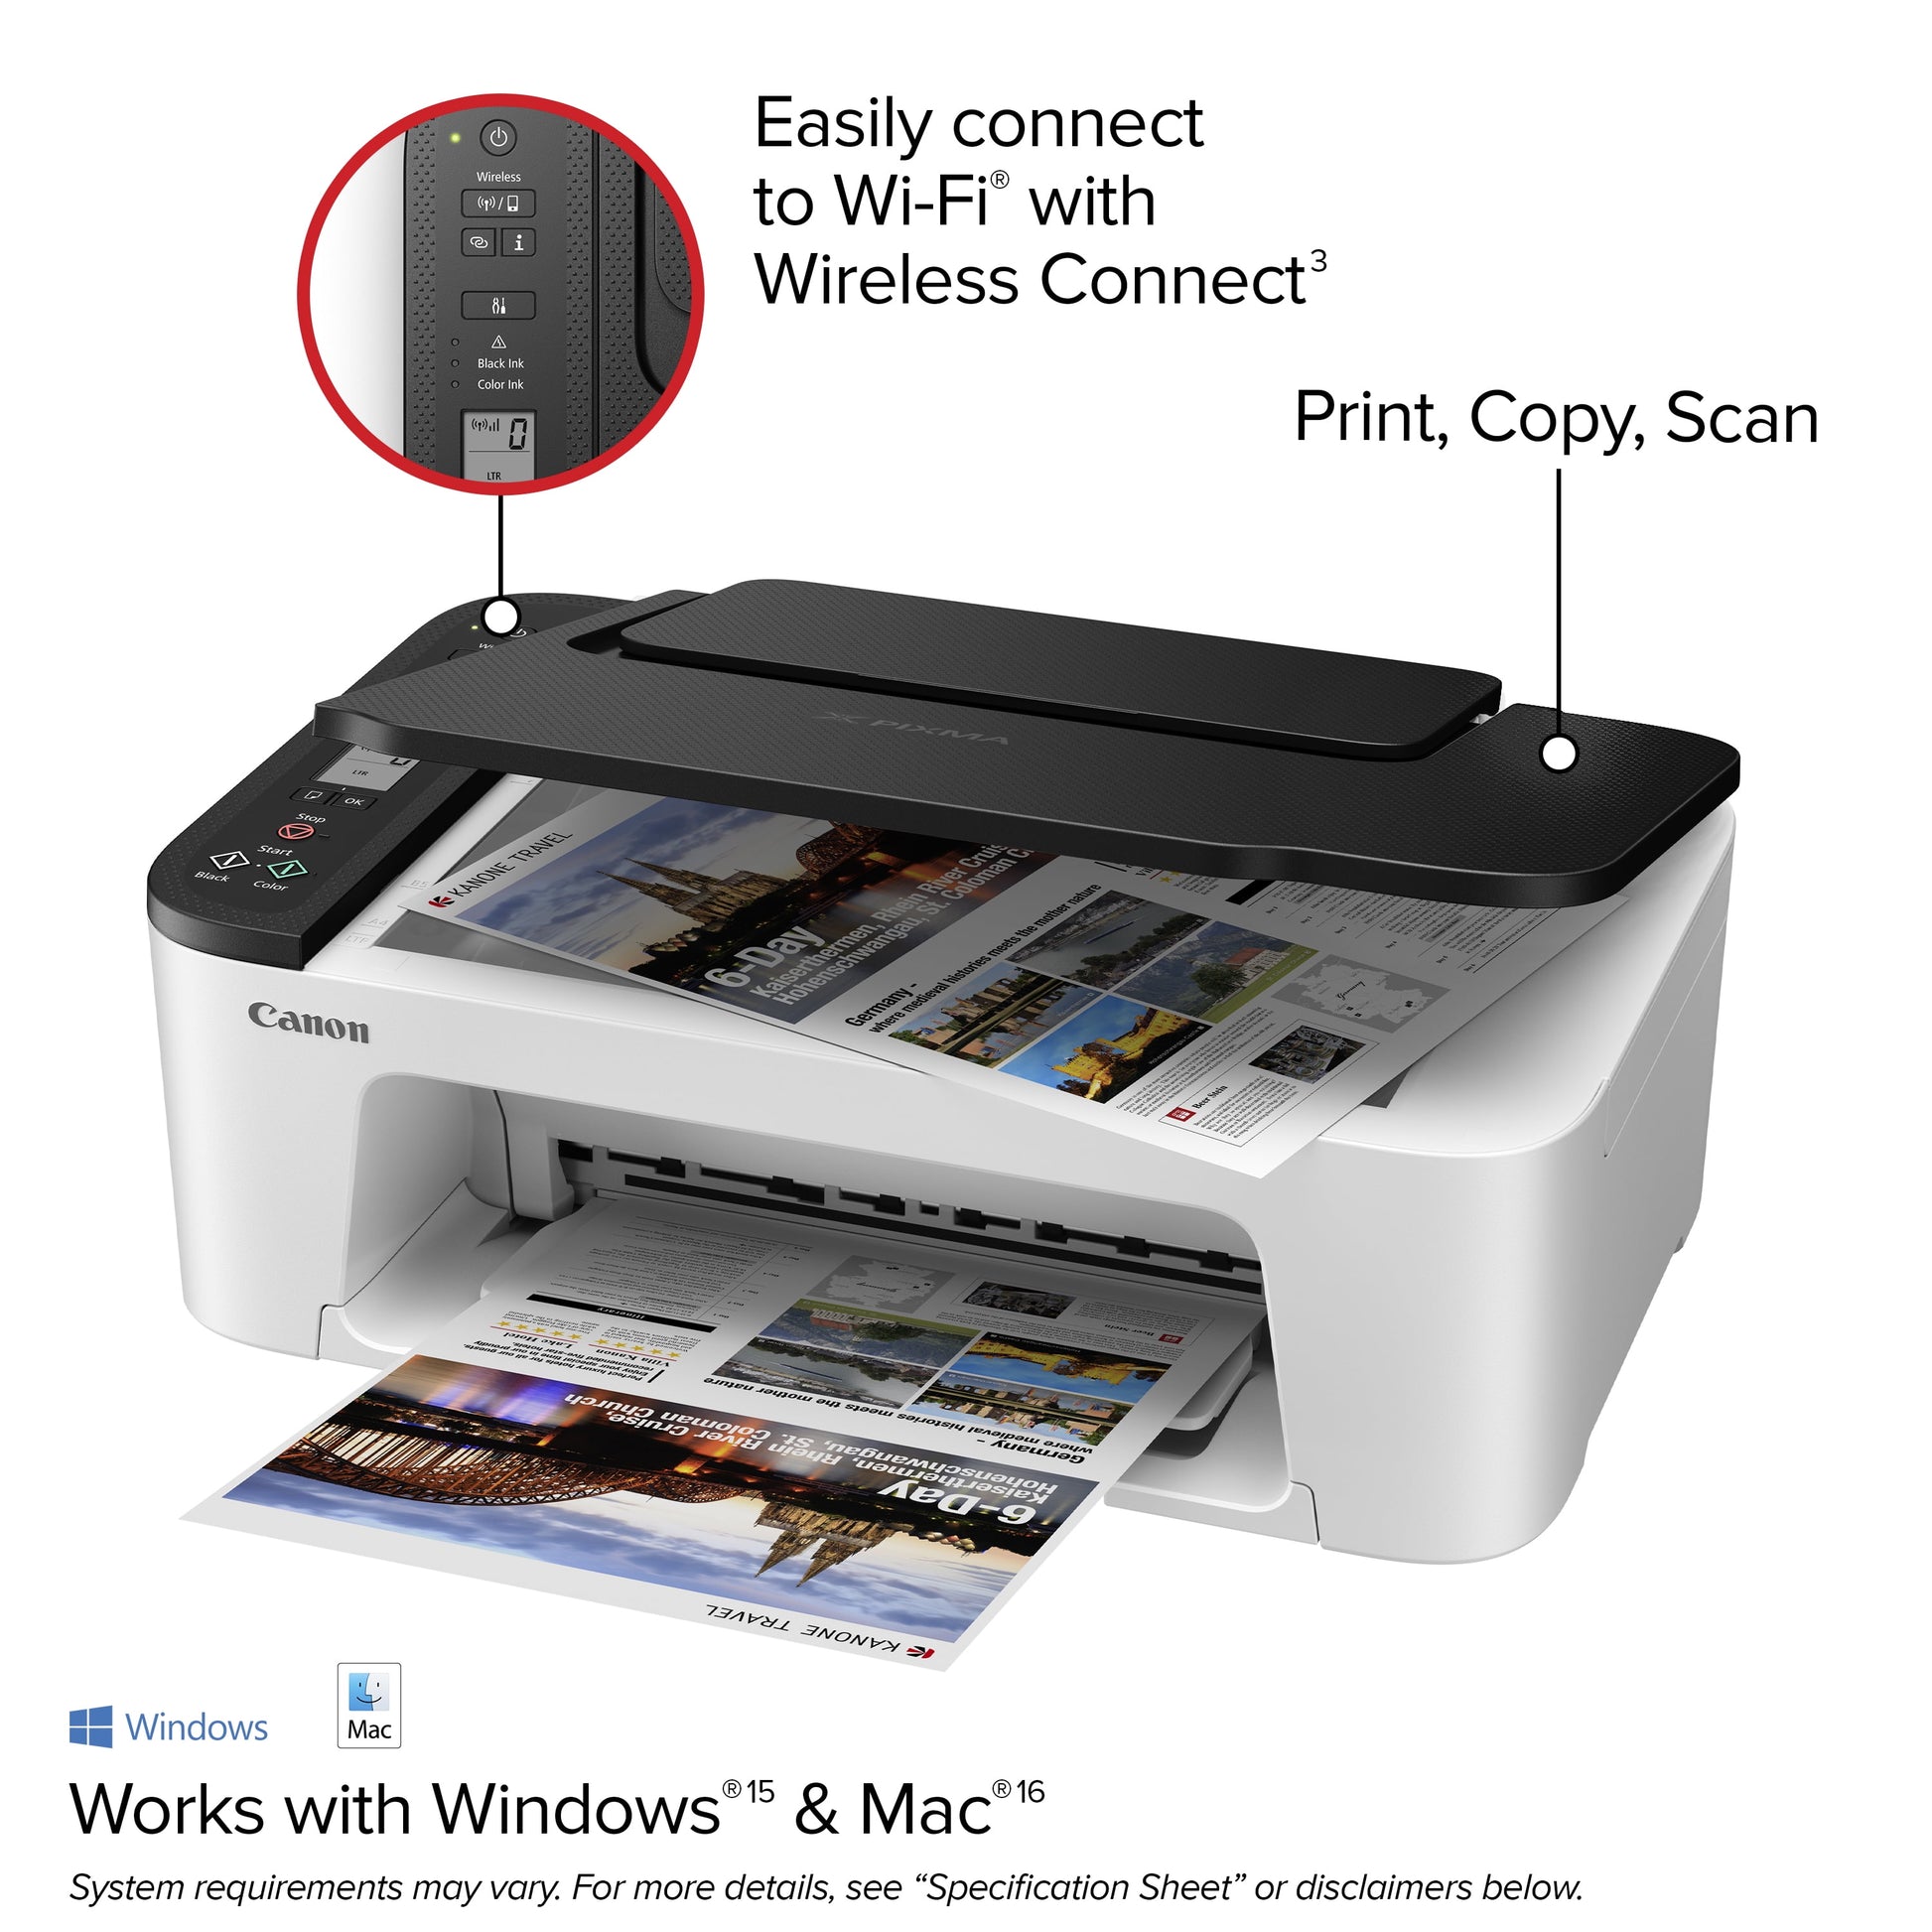 Canon PIXMA TS3522 -Wireless All-In-One Printer Ink Included